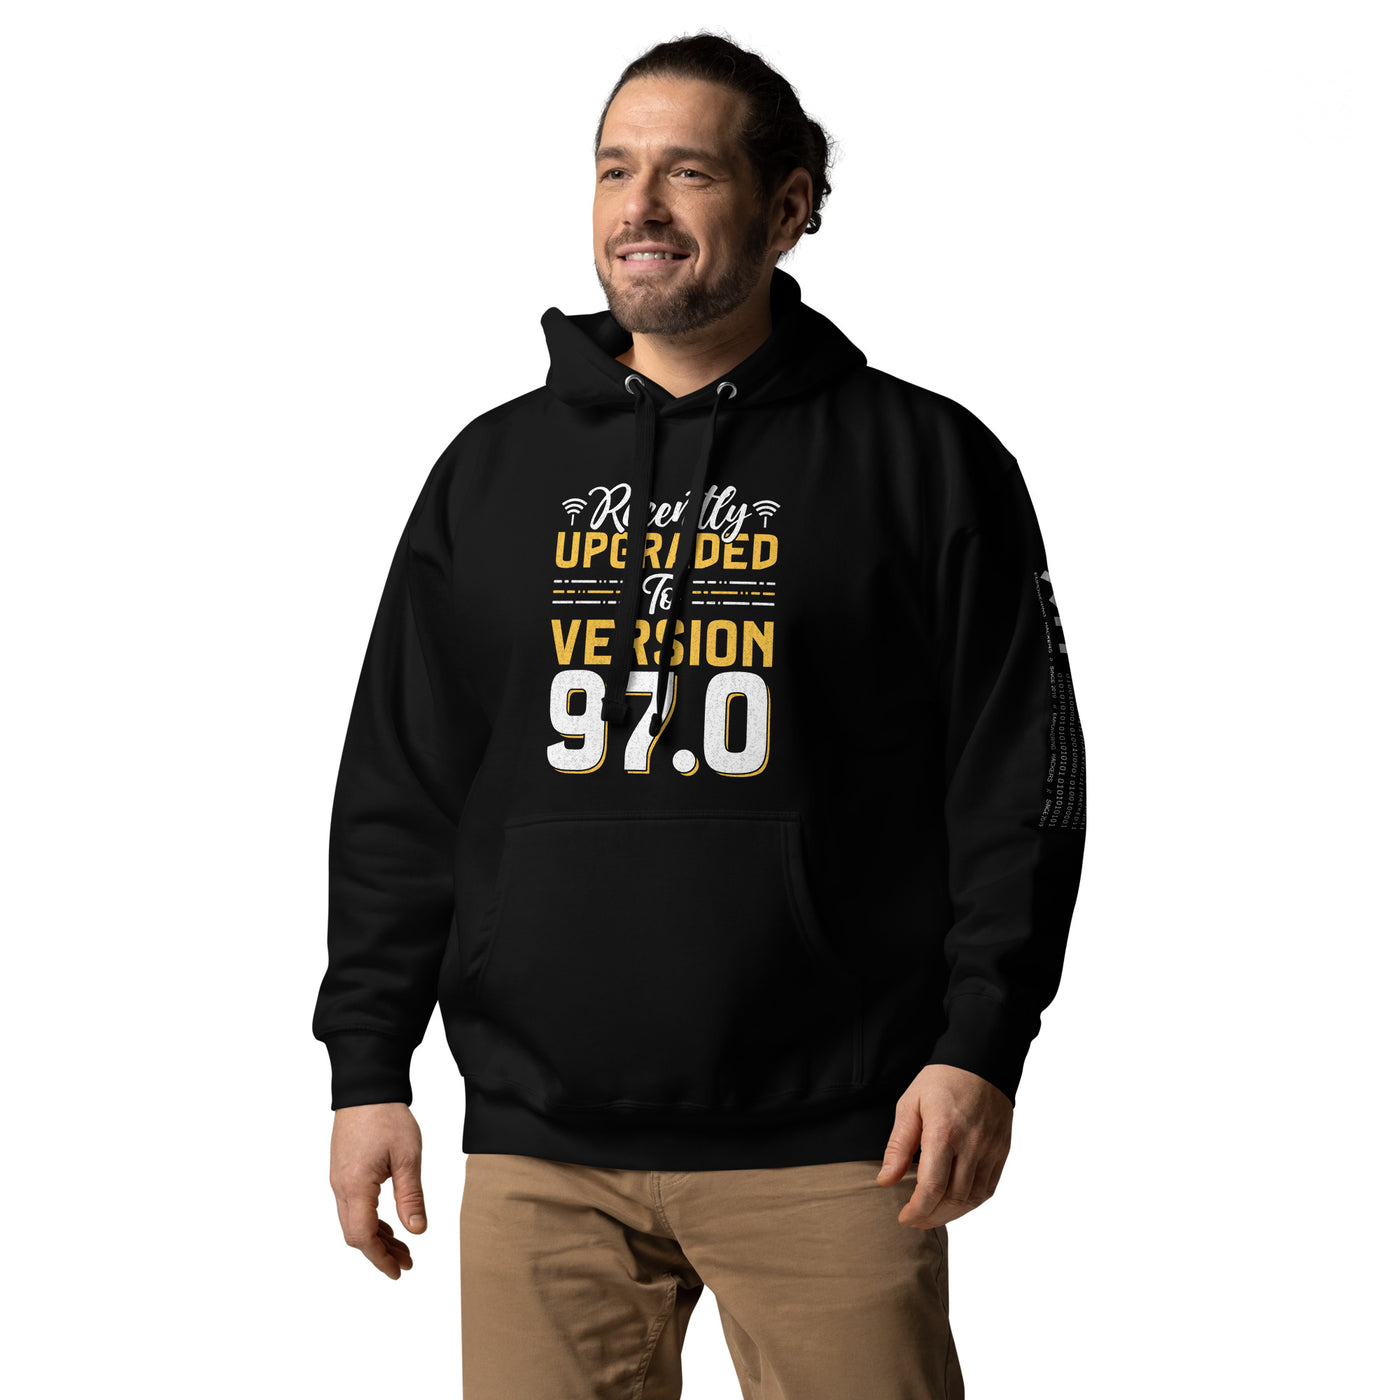 Recently Upgraded to Version 97.0 - Unisex Hoodie